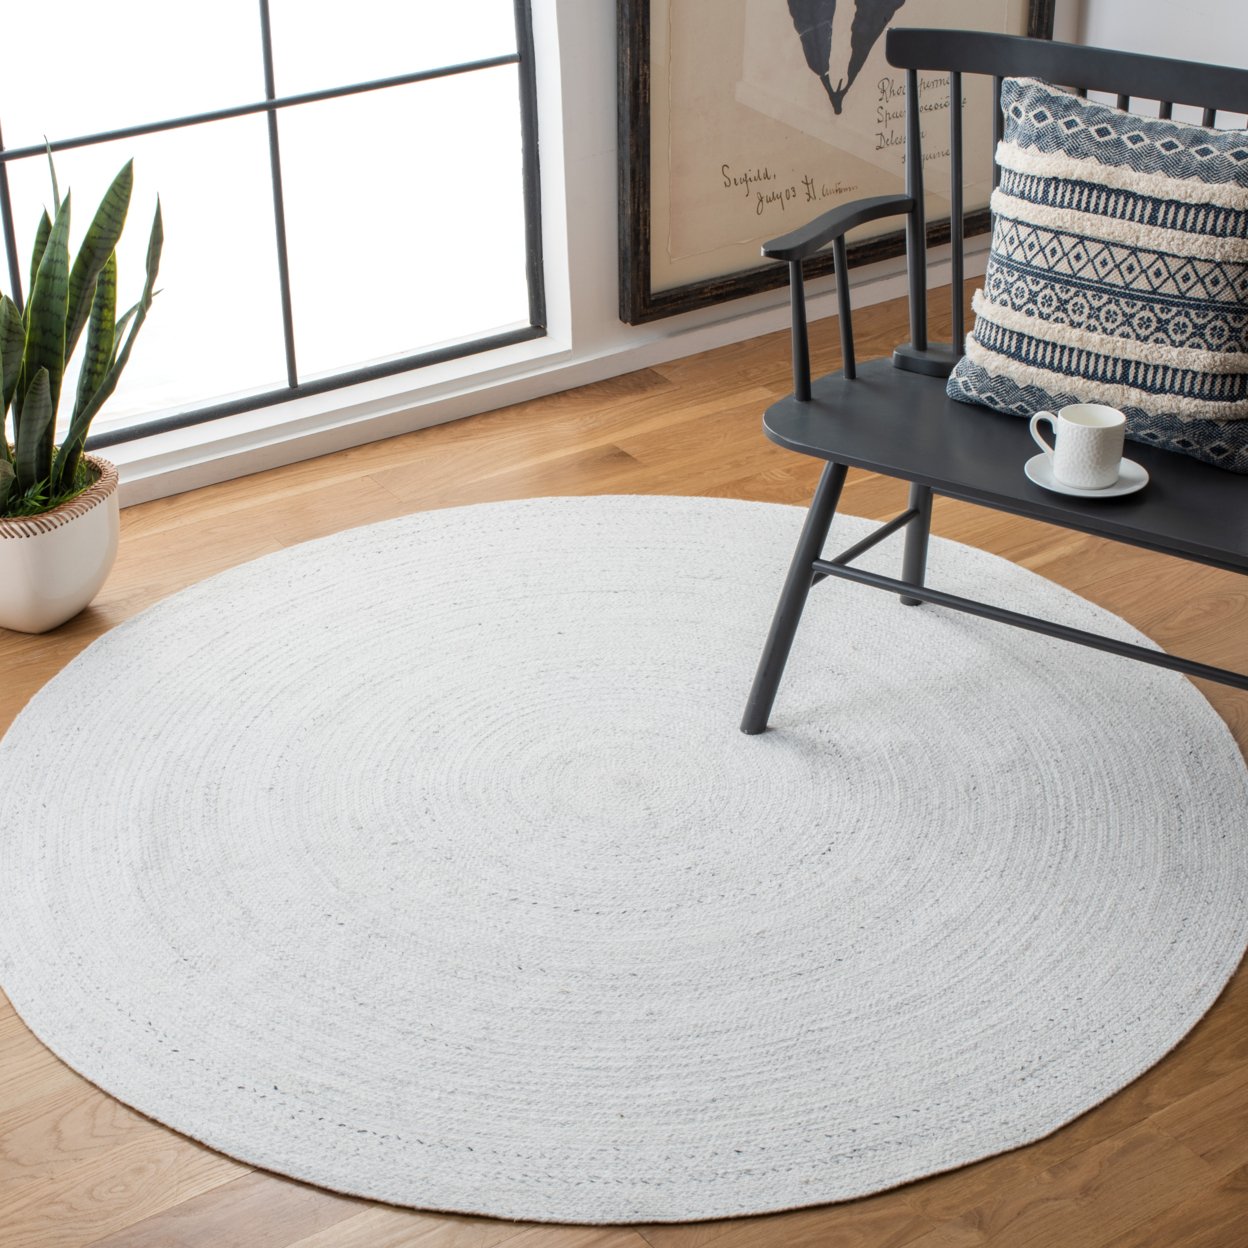 SAFAVIEH Cape Cod Collection CAP224A Handwoven Ivory Rug - 7' Round